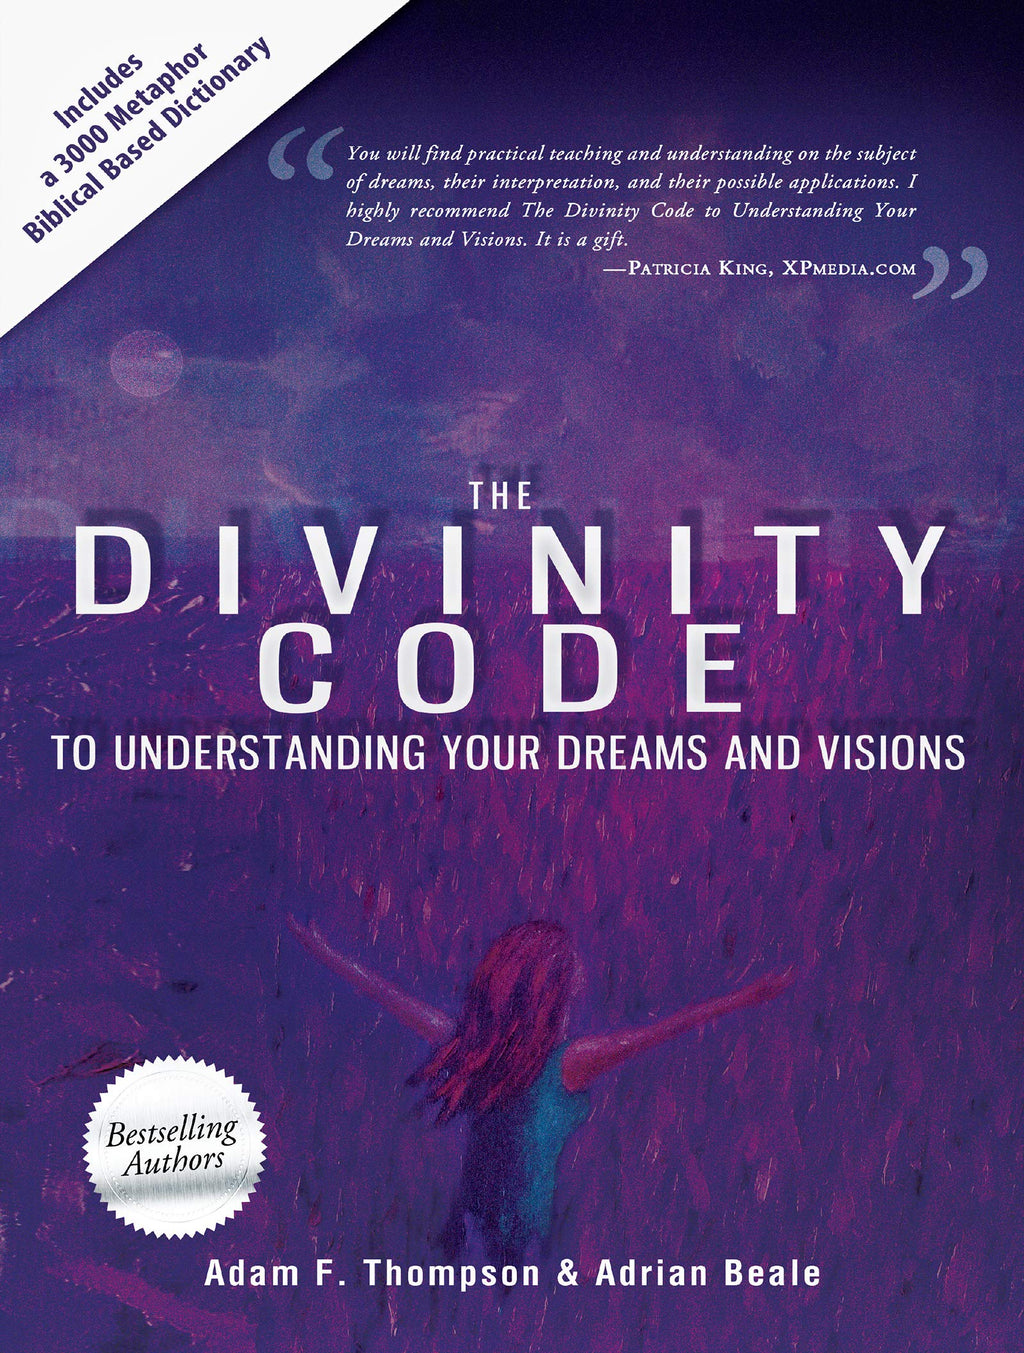 The Divinity Code